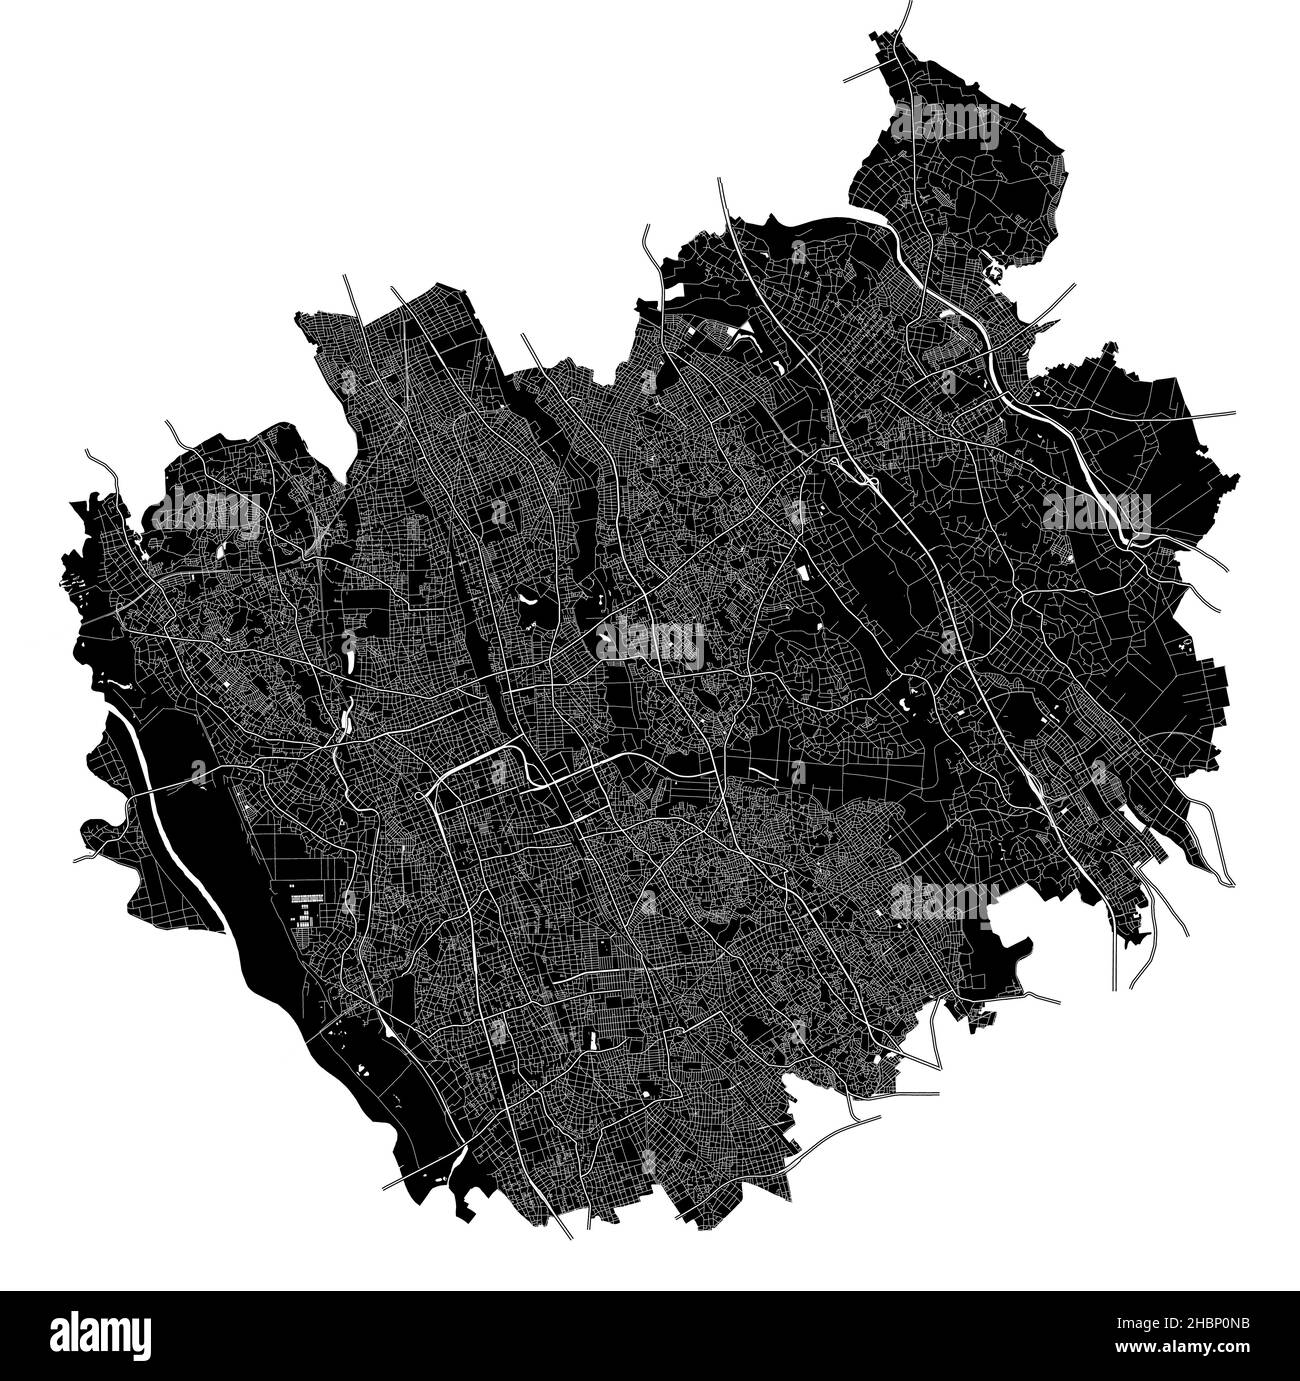 Saitama, Japan, high resolution vector map with city boundaries, and editable paths. The city map was drawn with white areas and lines for main roads, Stock Vector